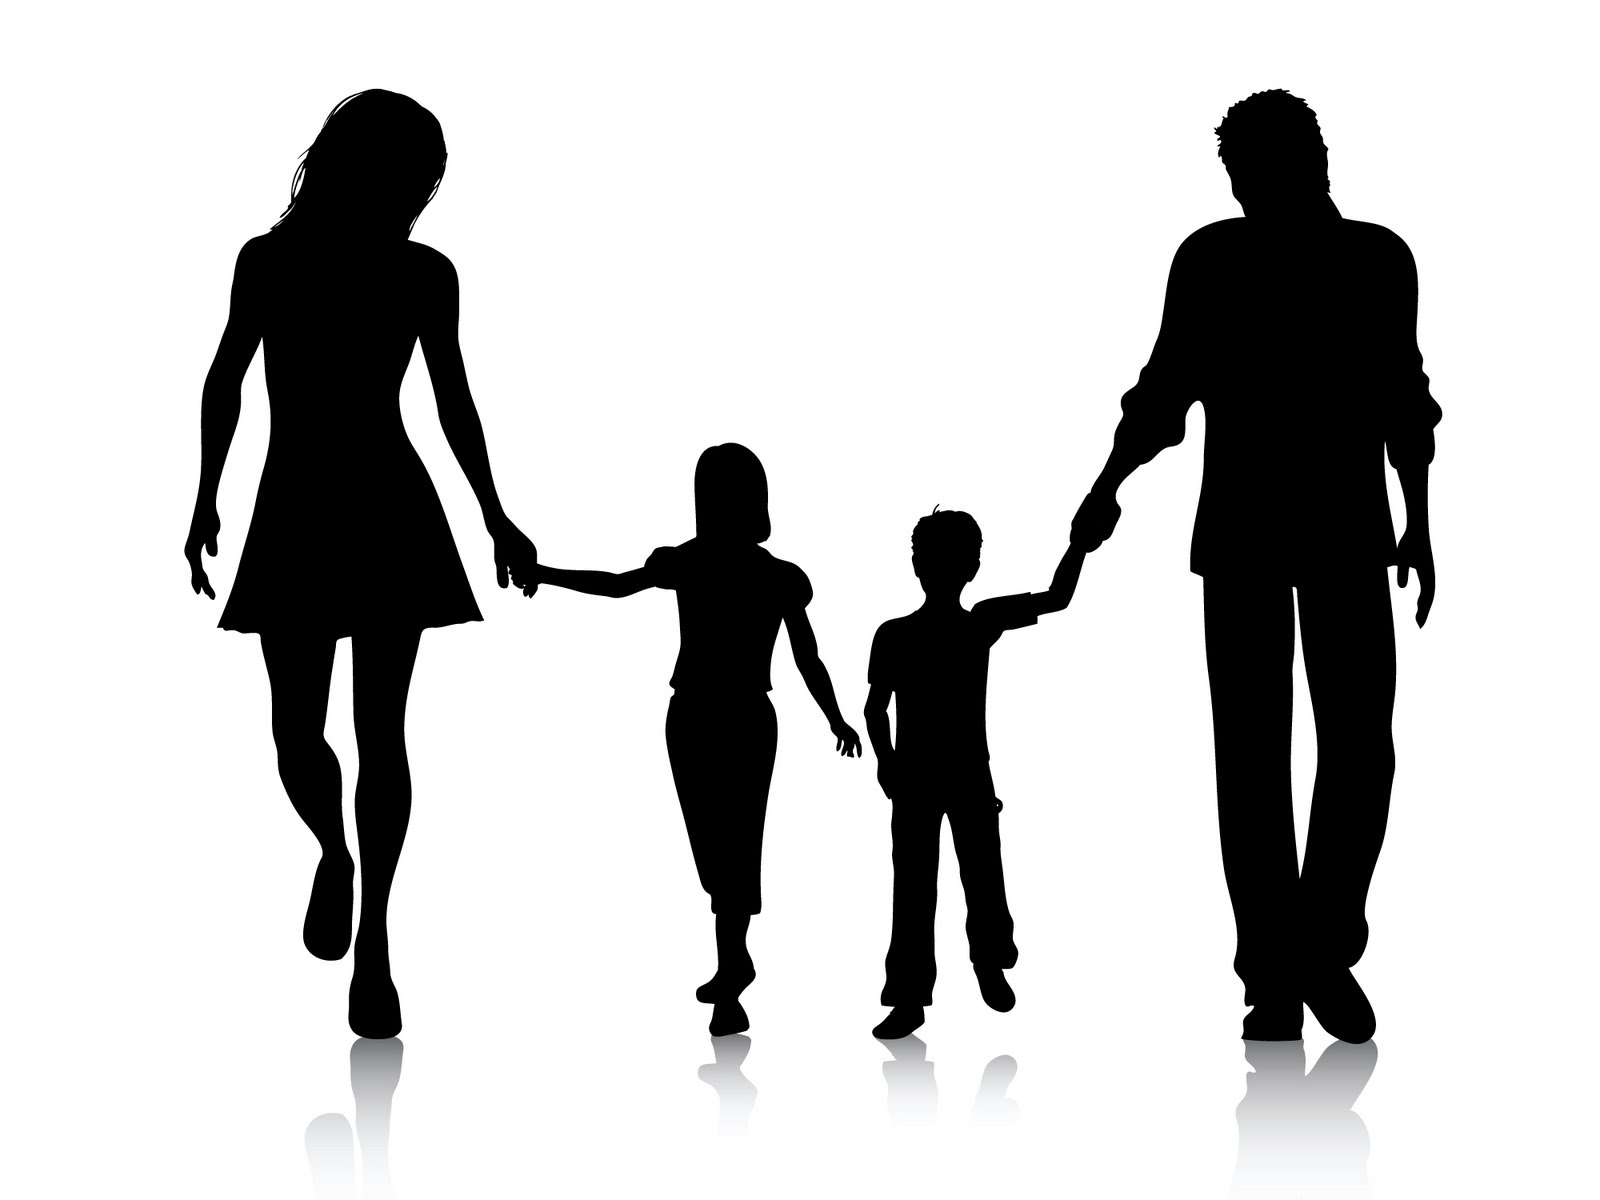 File:Family clip art.jpg | Clipart library - Free Clipart Images